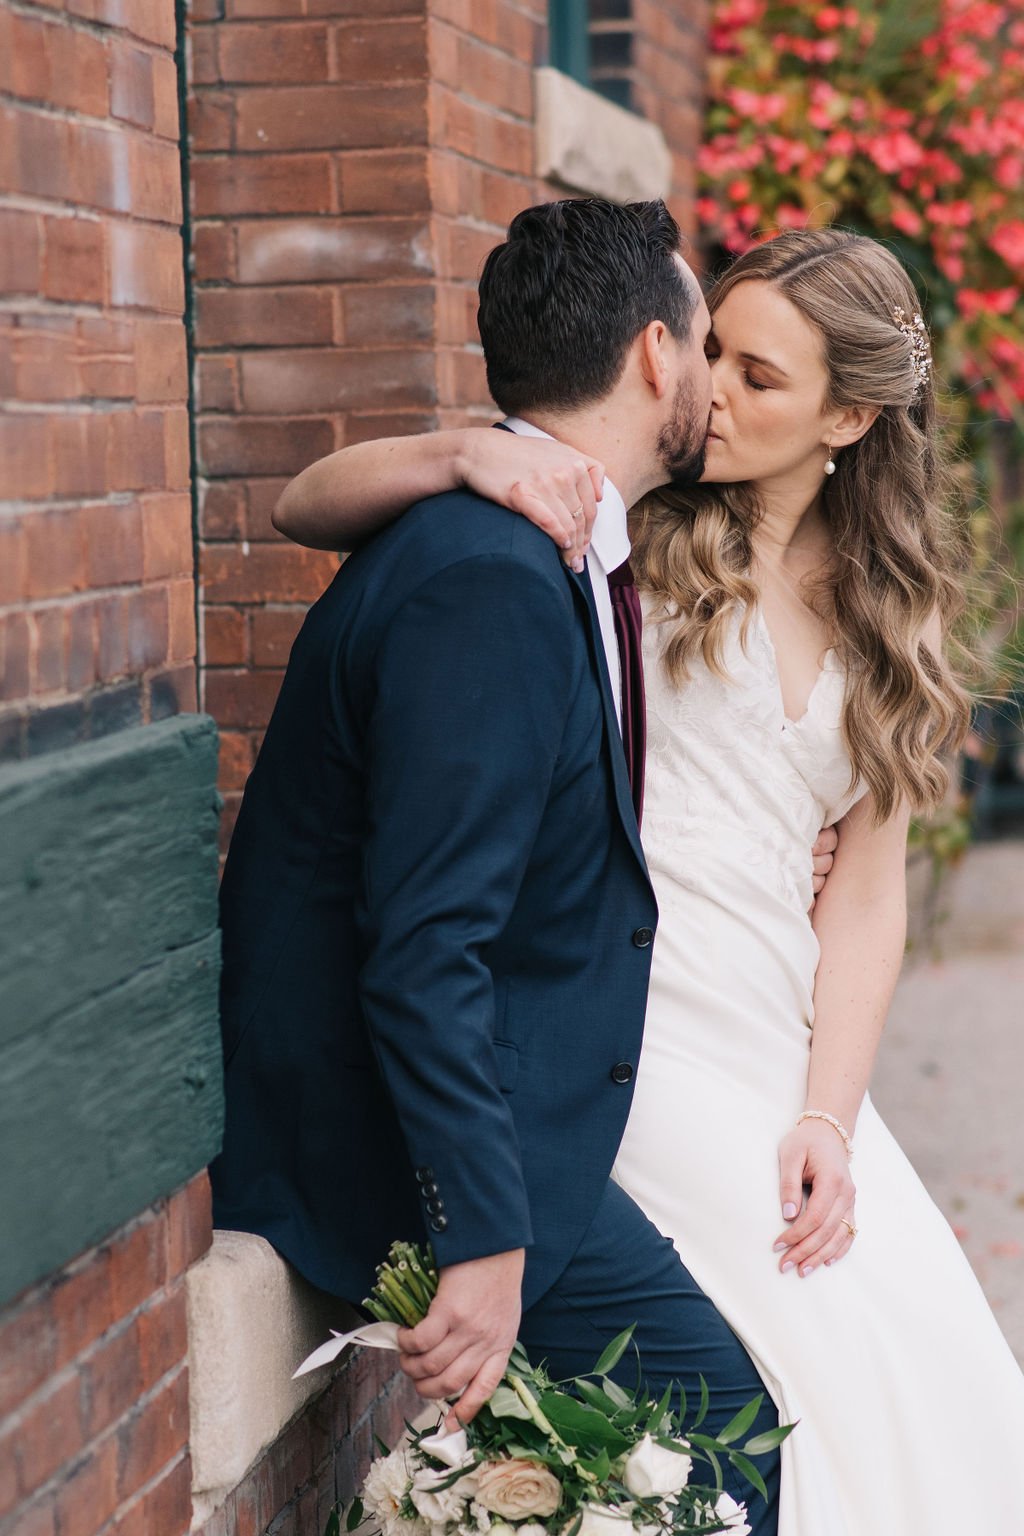 Timeless wedding day photographs in Toronto's Liberty Village by Toronto wedding photographers, Ugo Photography